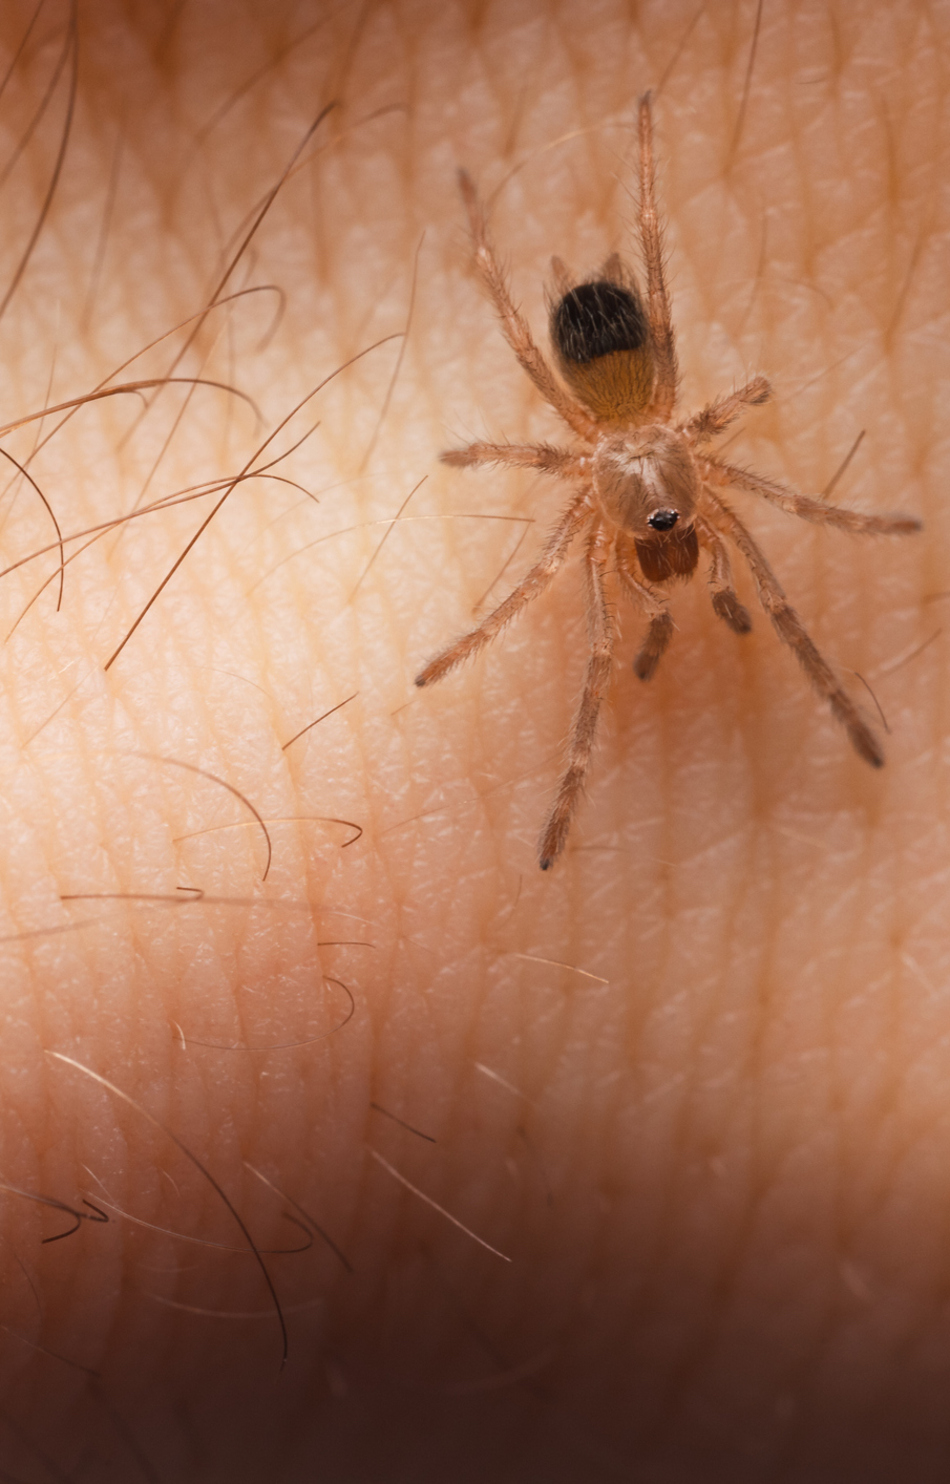 Signs and Symptoms of a Poisonous Spider Bite